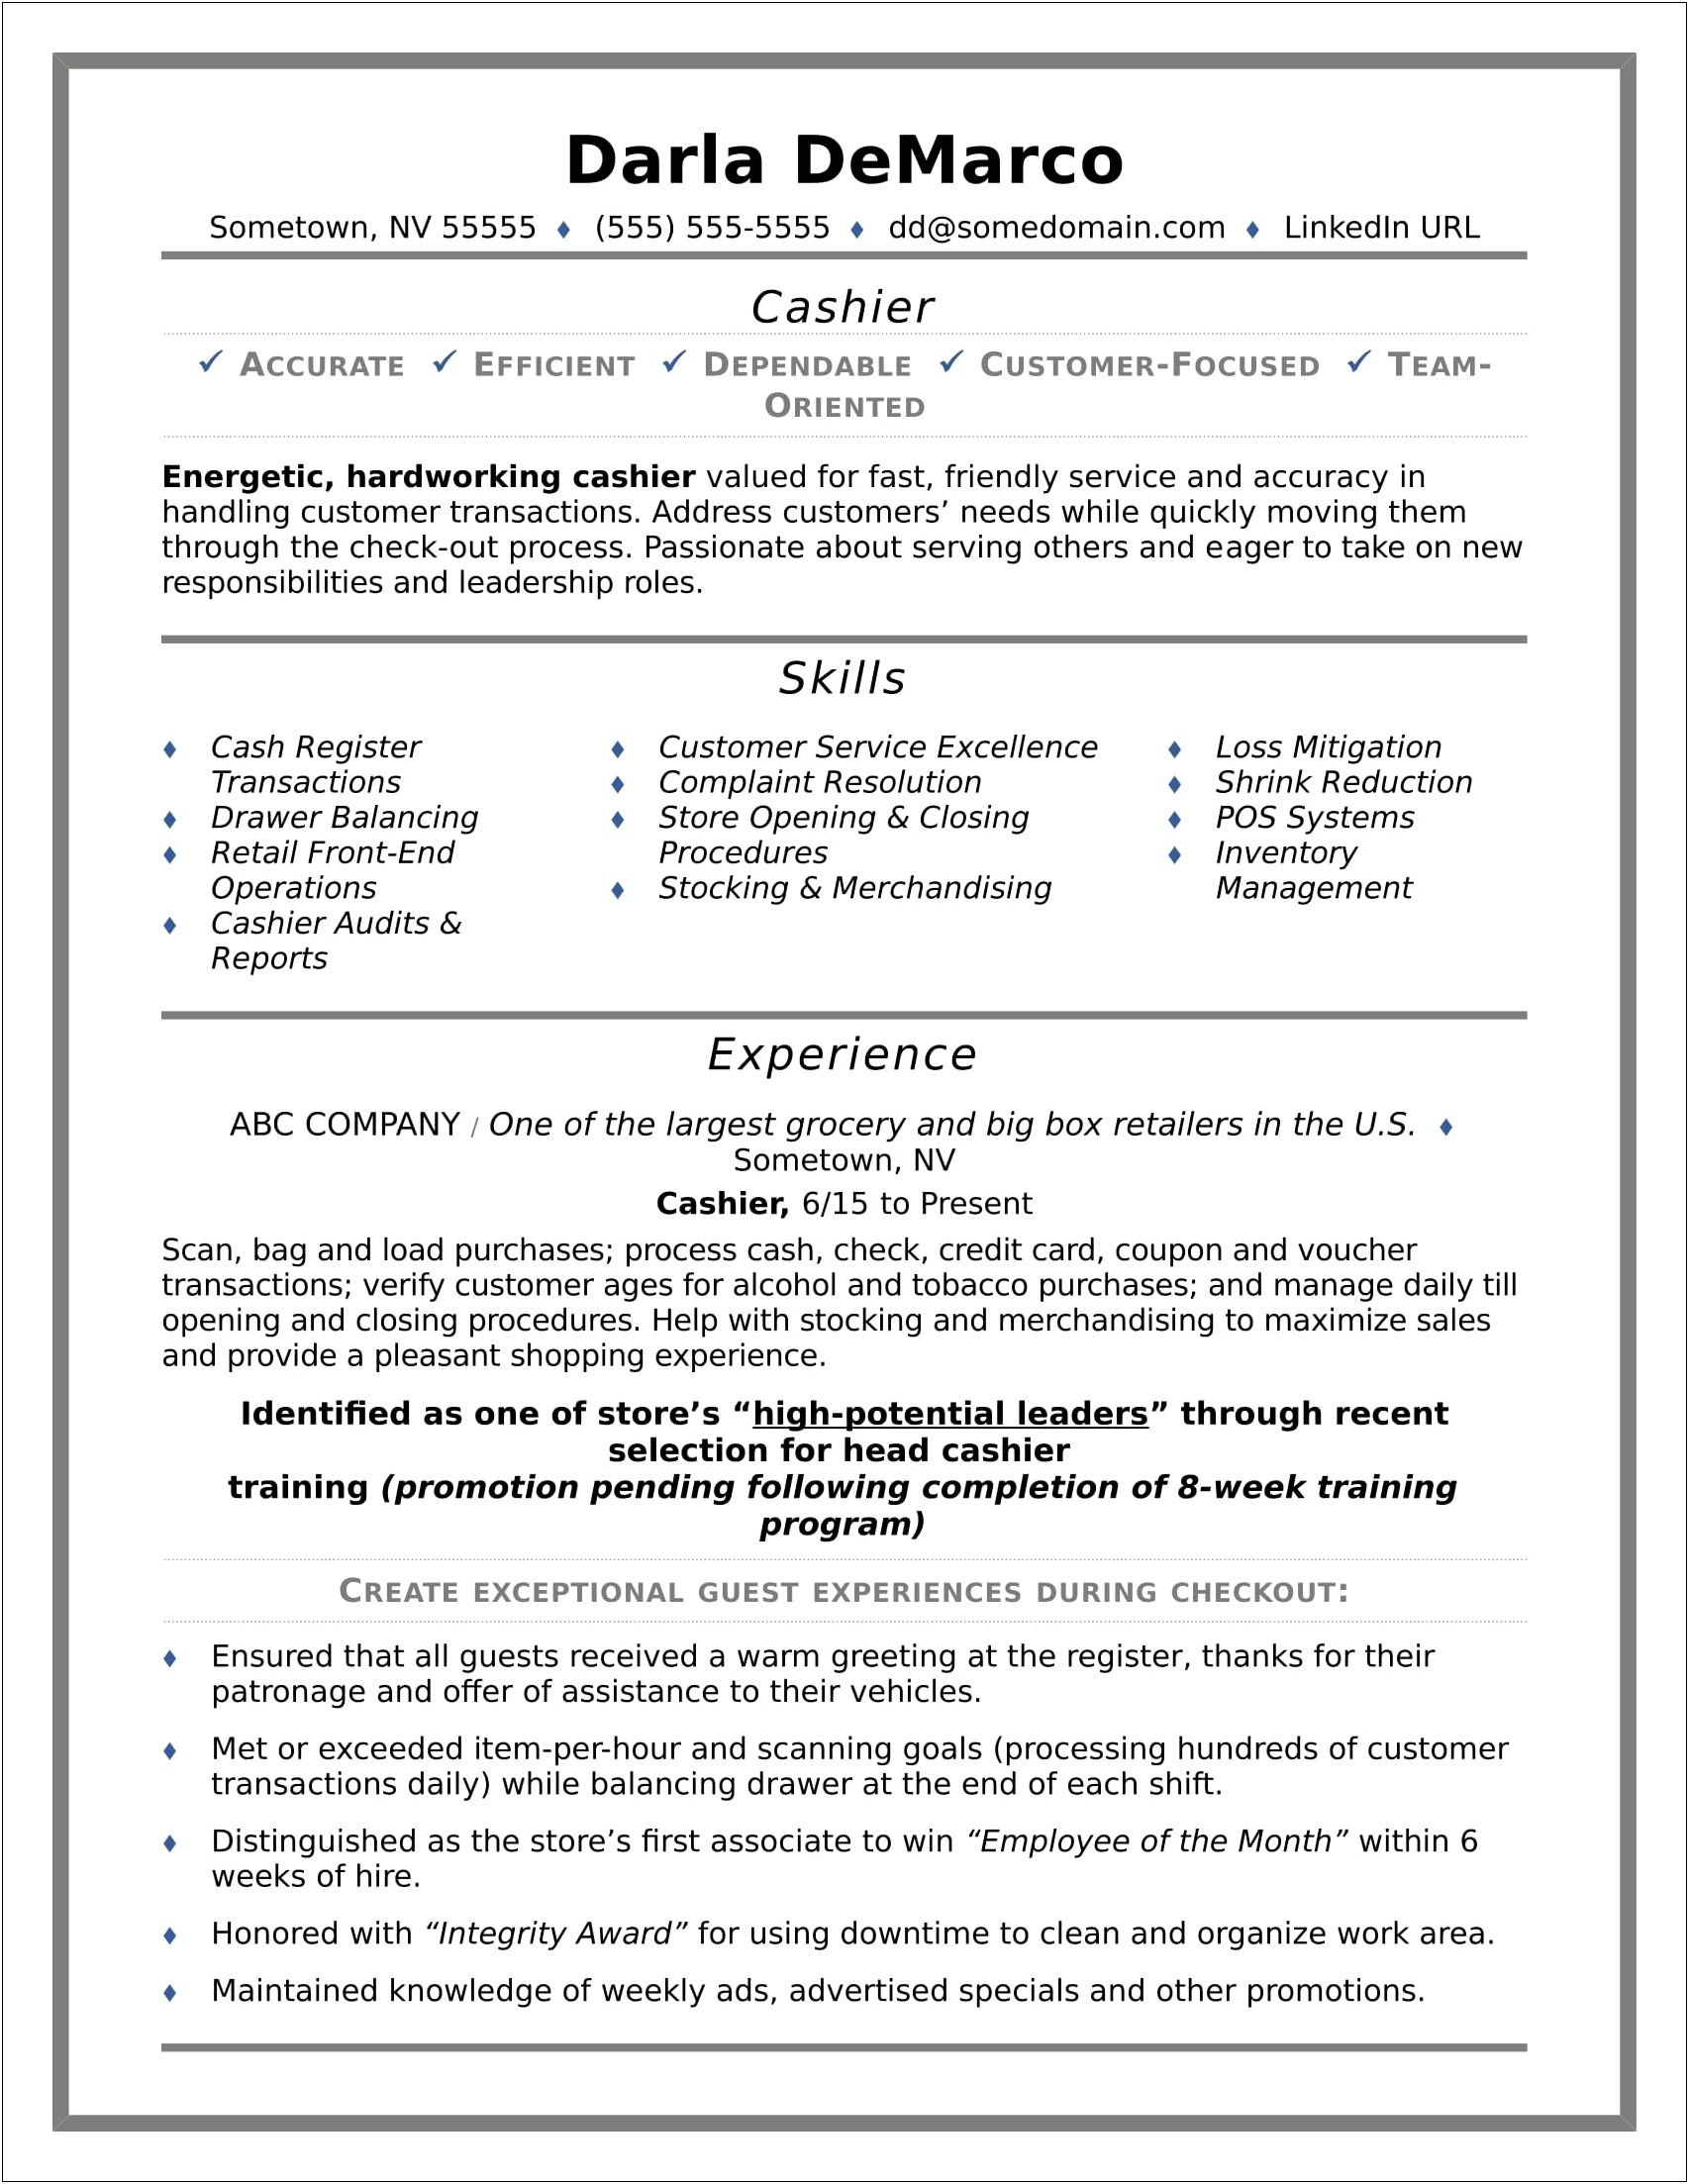 Retail Workers Example Resume Store Cler